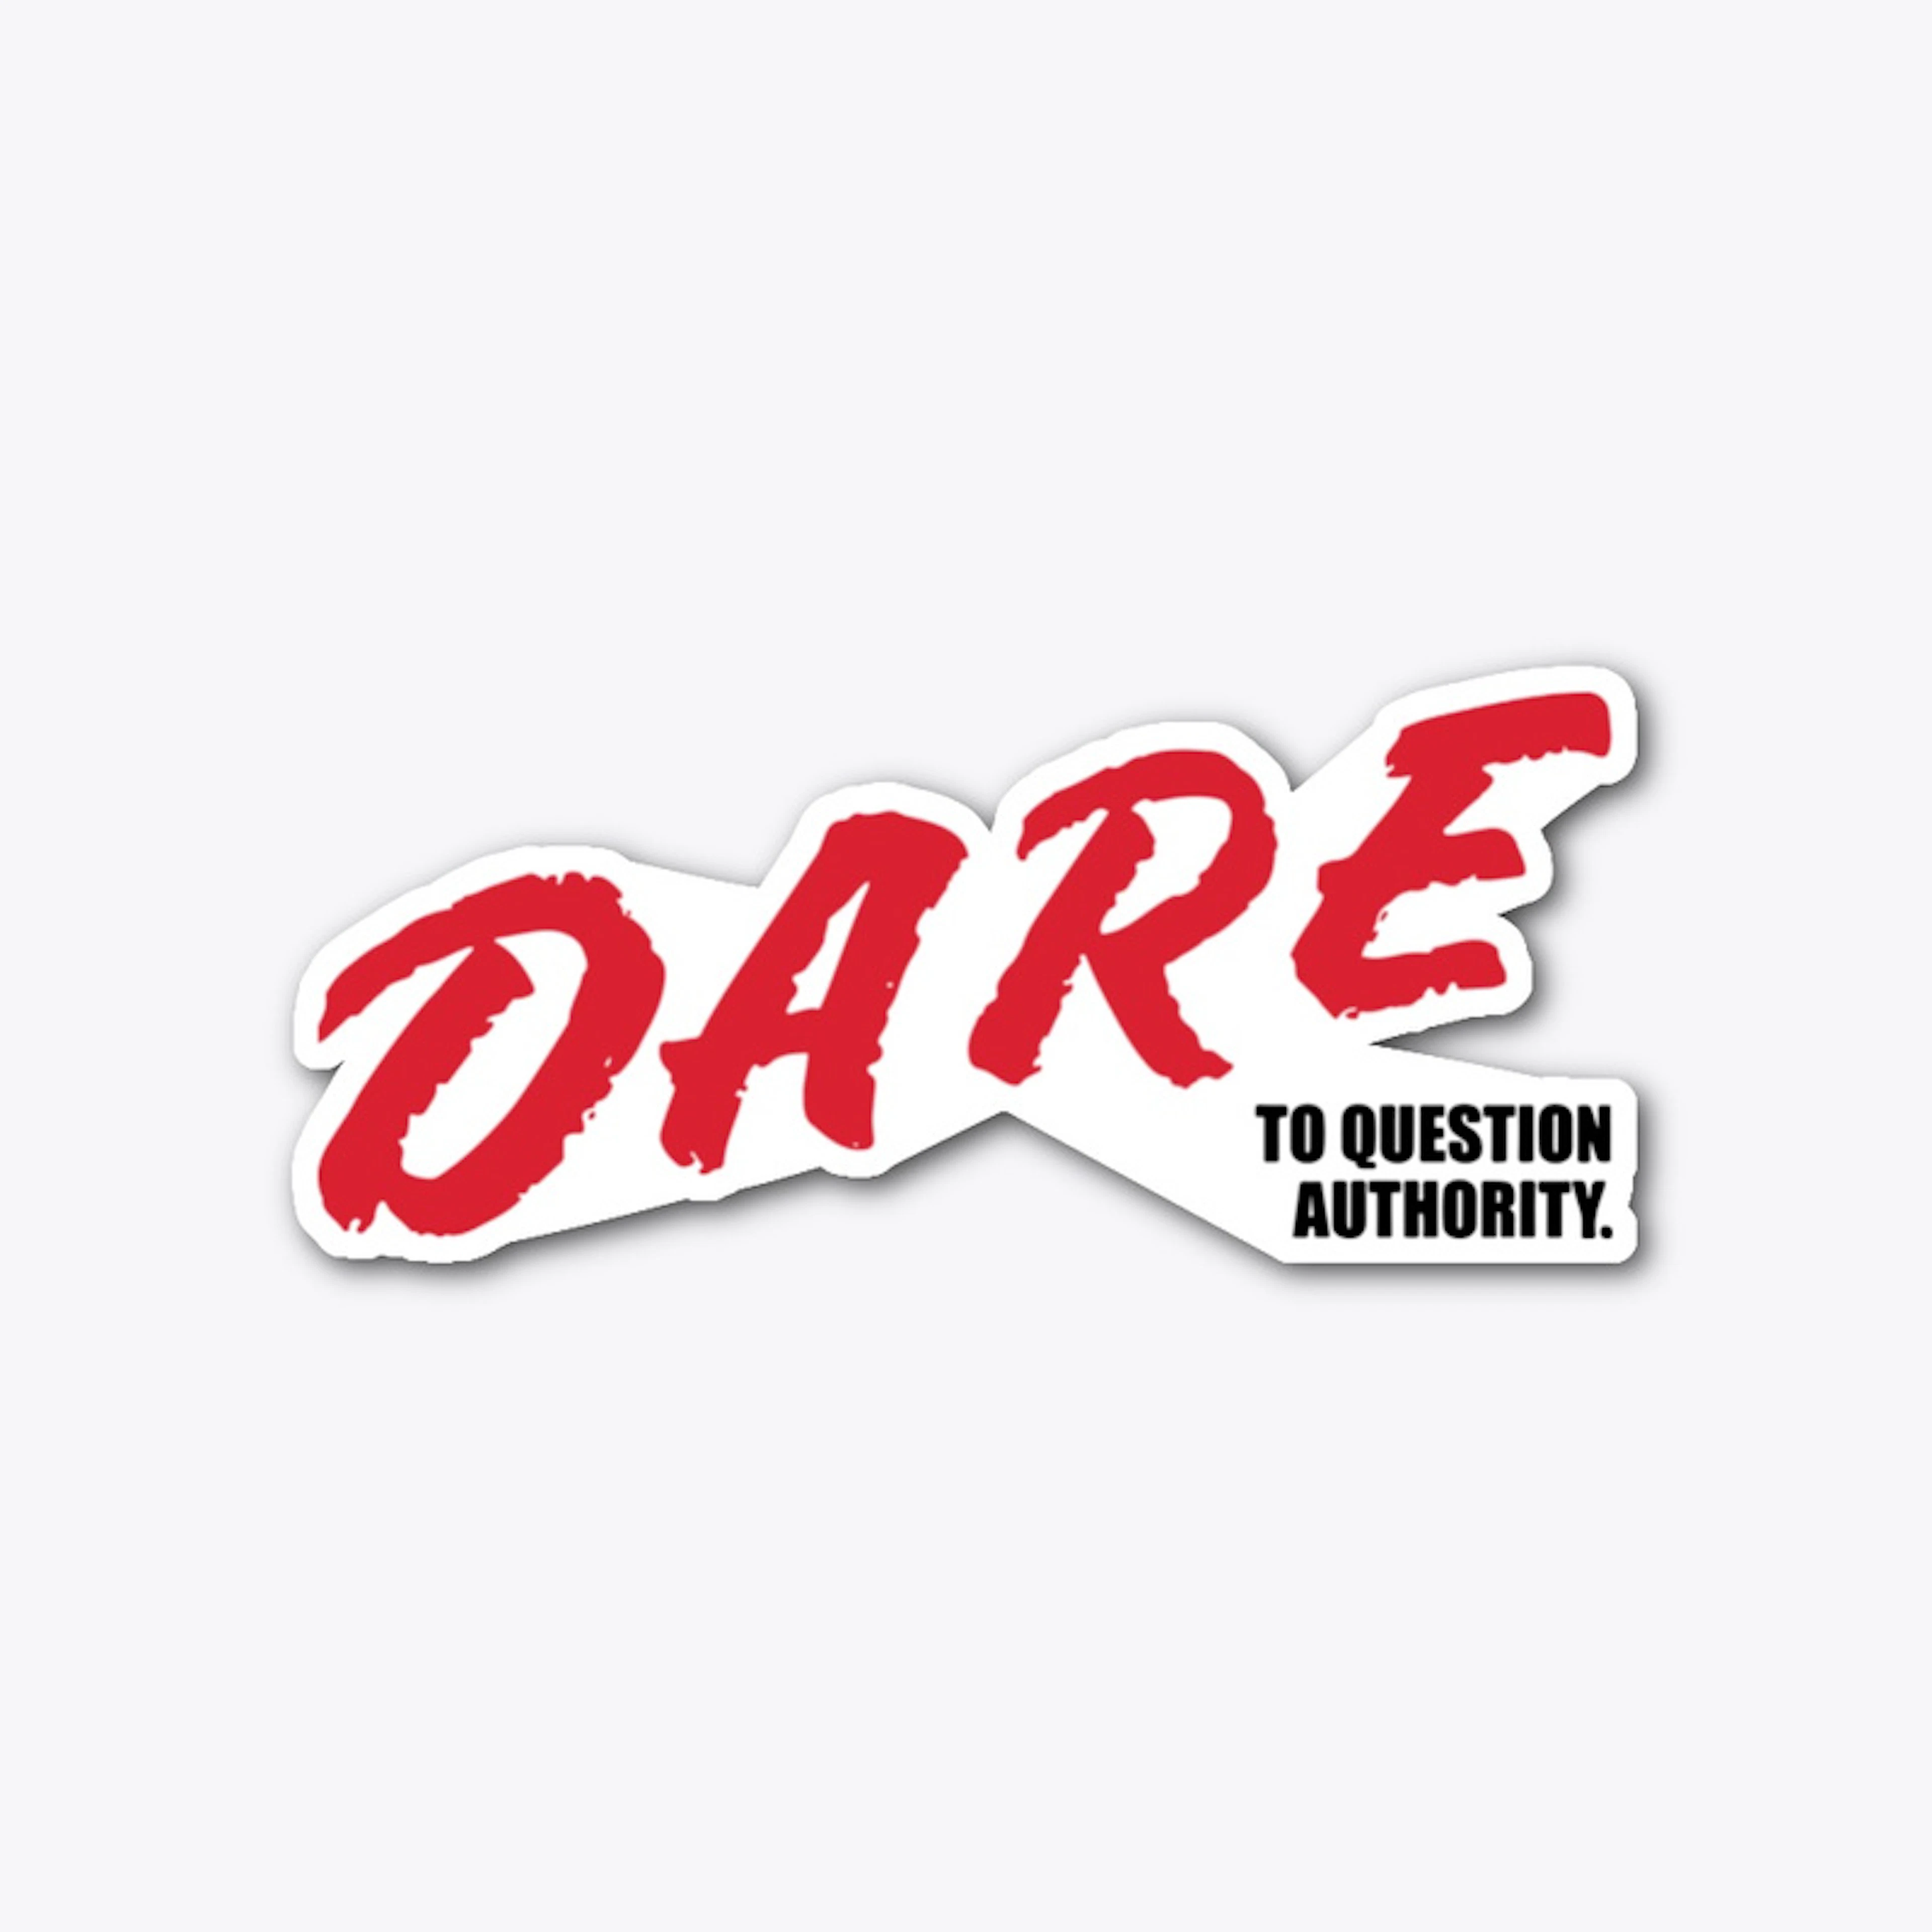 Dare to question authority